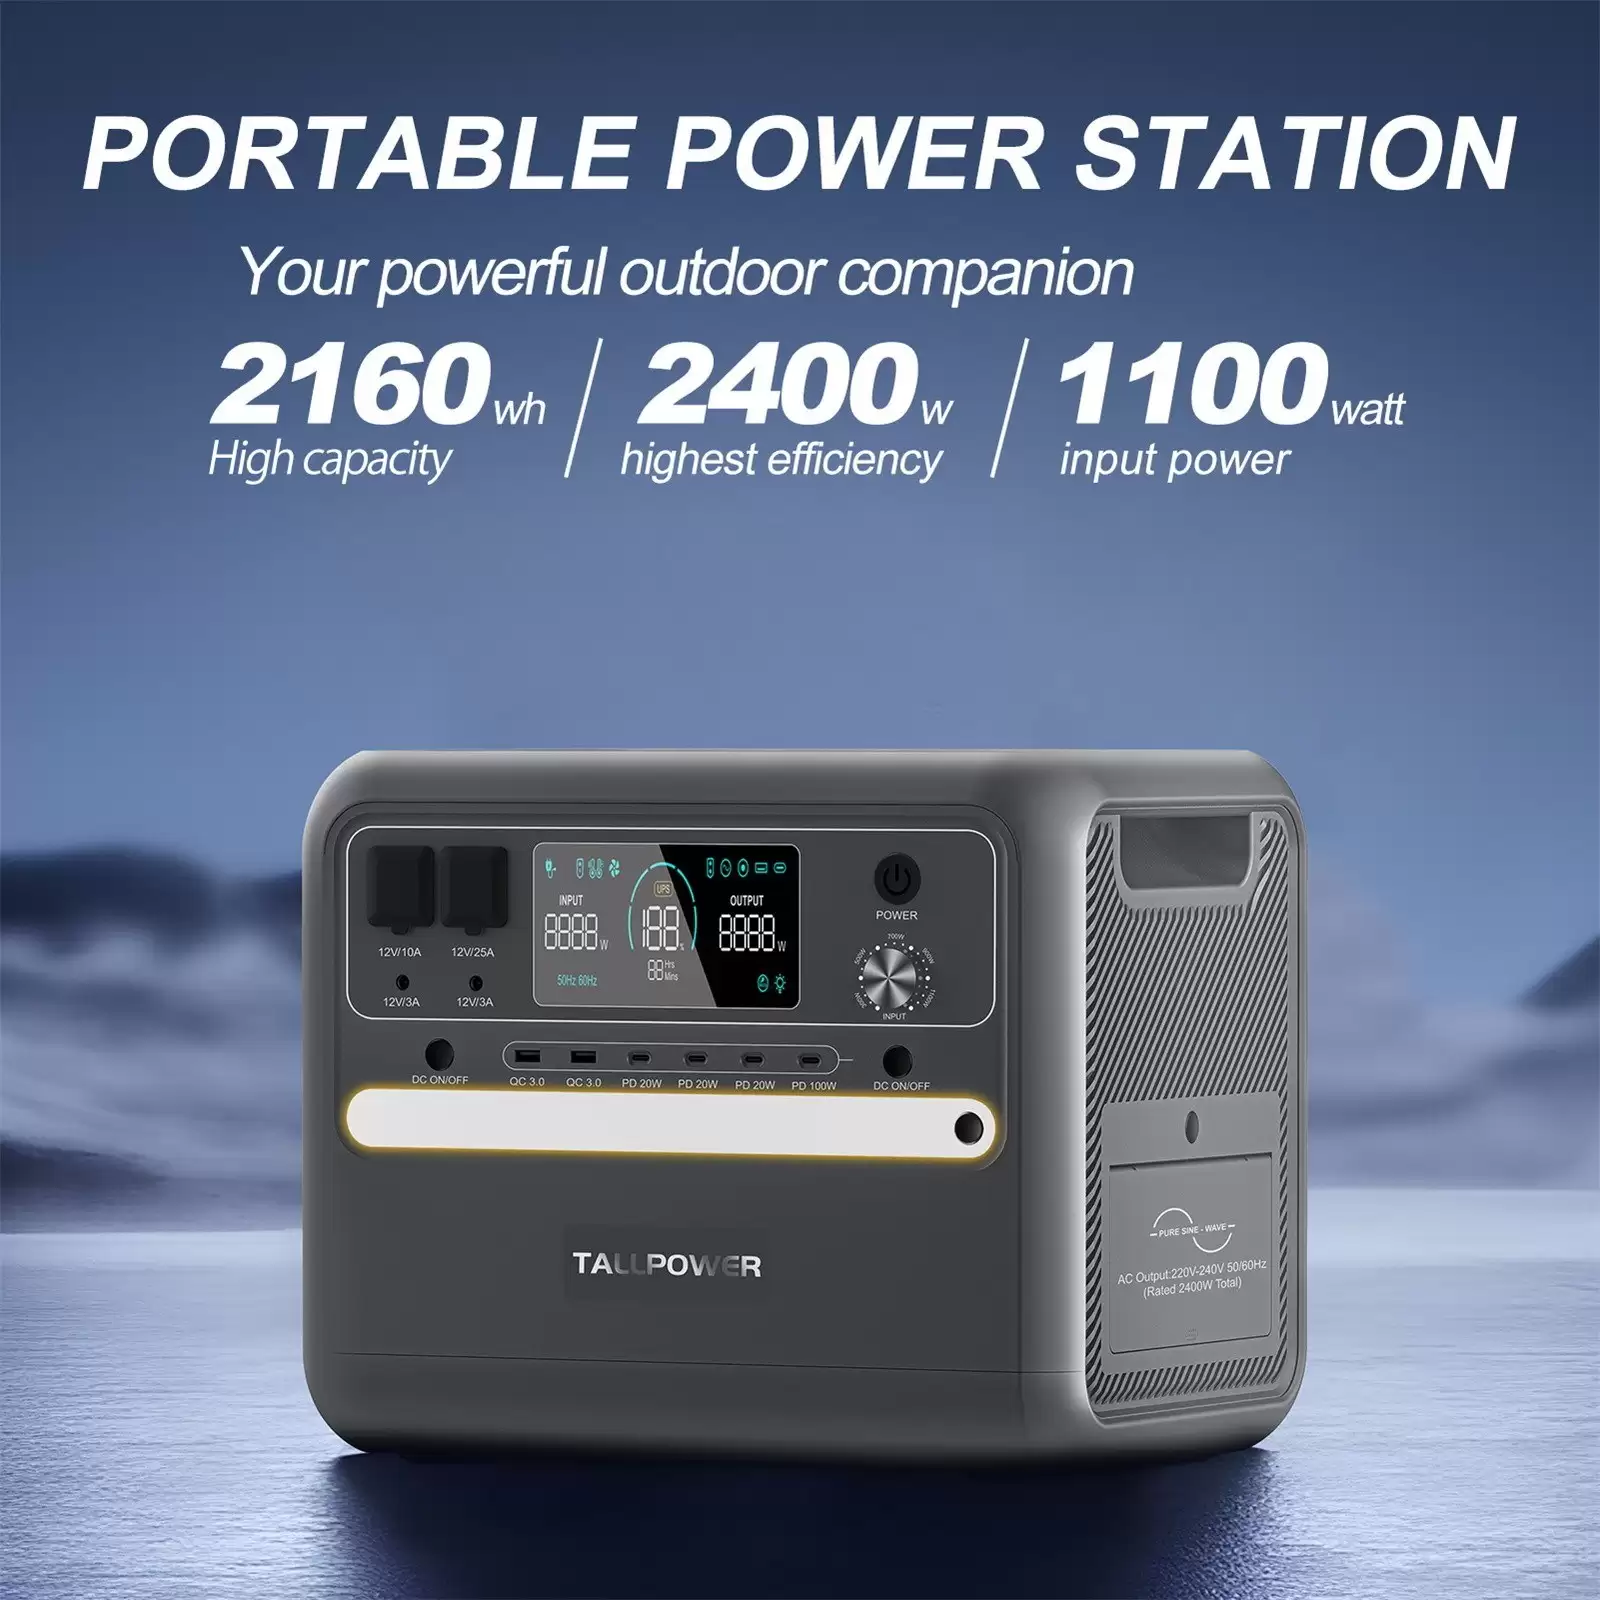 Order In Just $769 Tallpower V2400 Portable Power Station With This Discount Coupon At Cafago